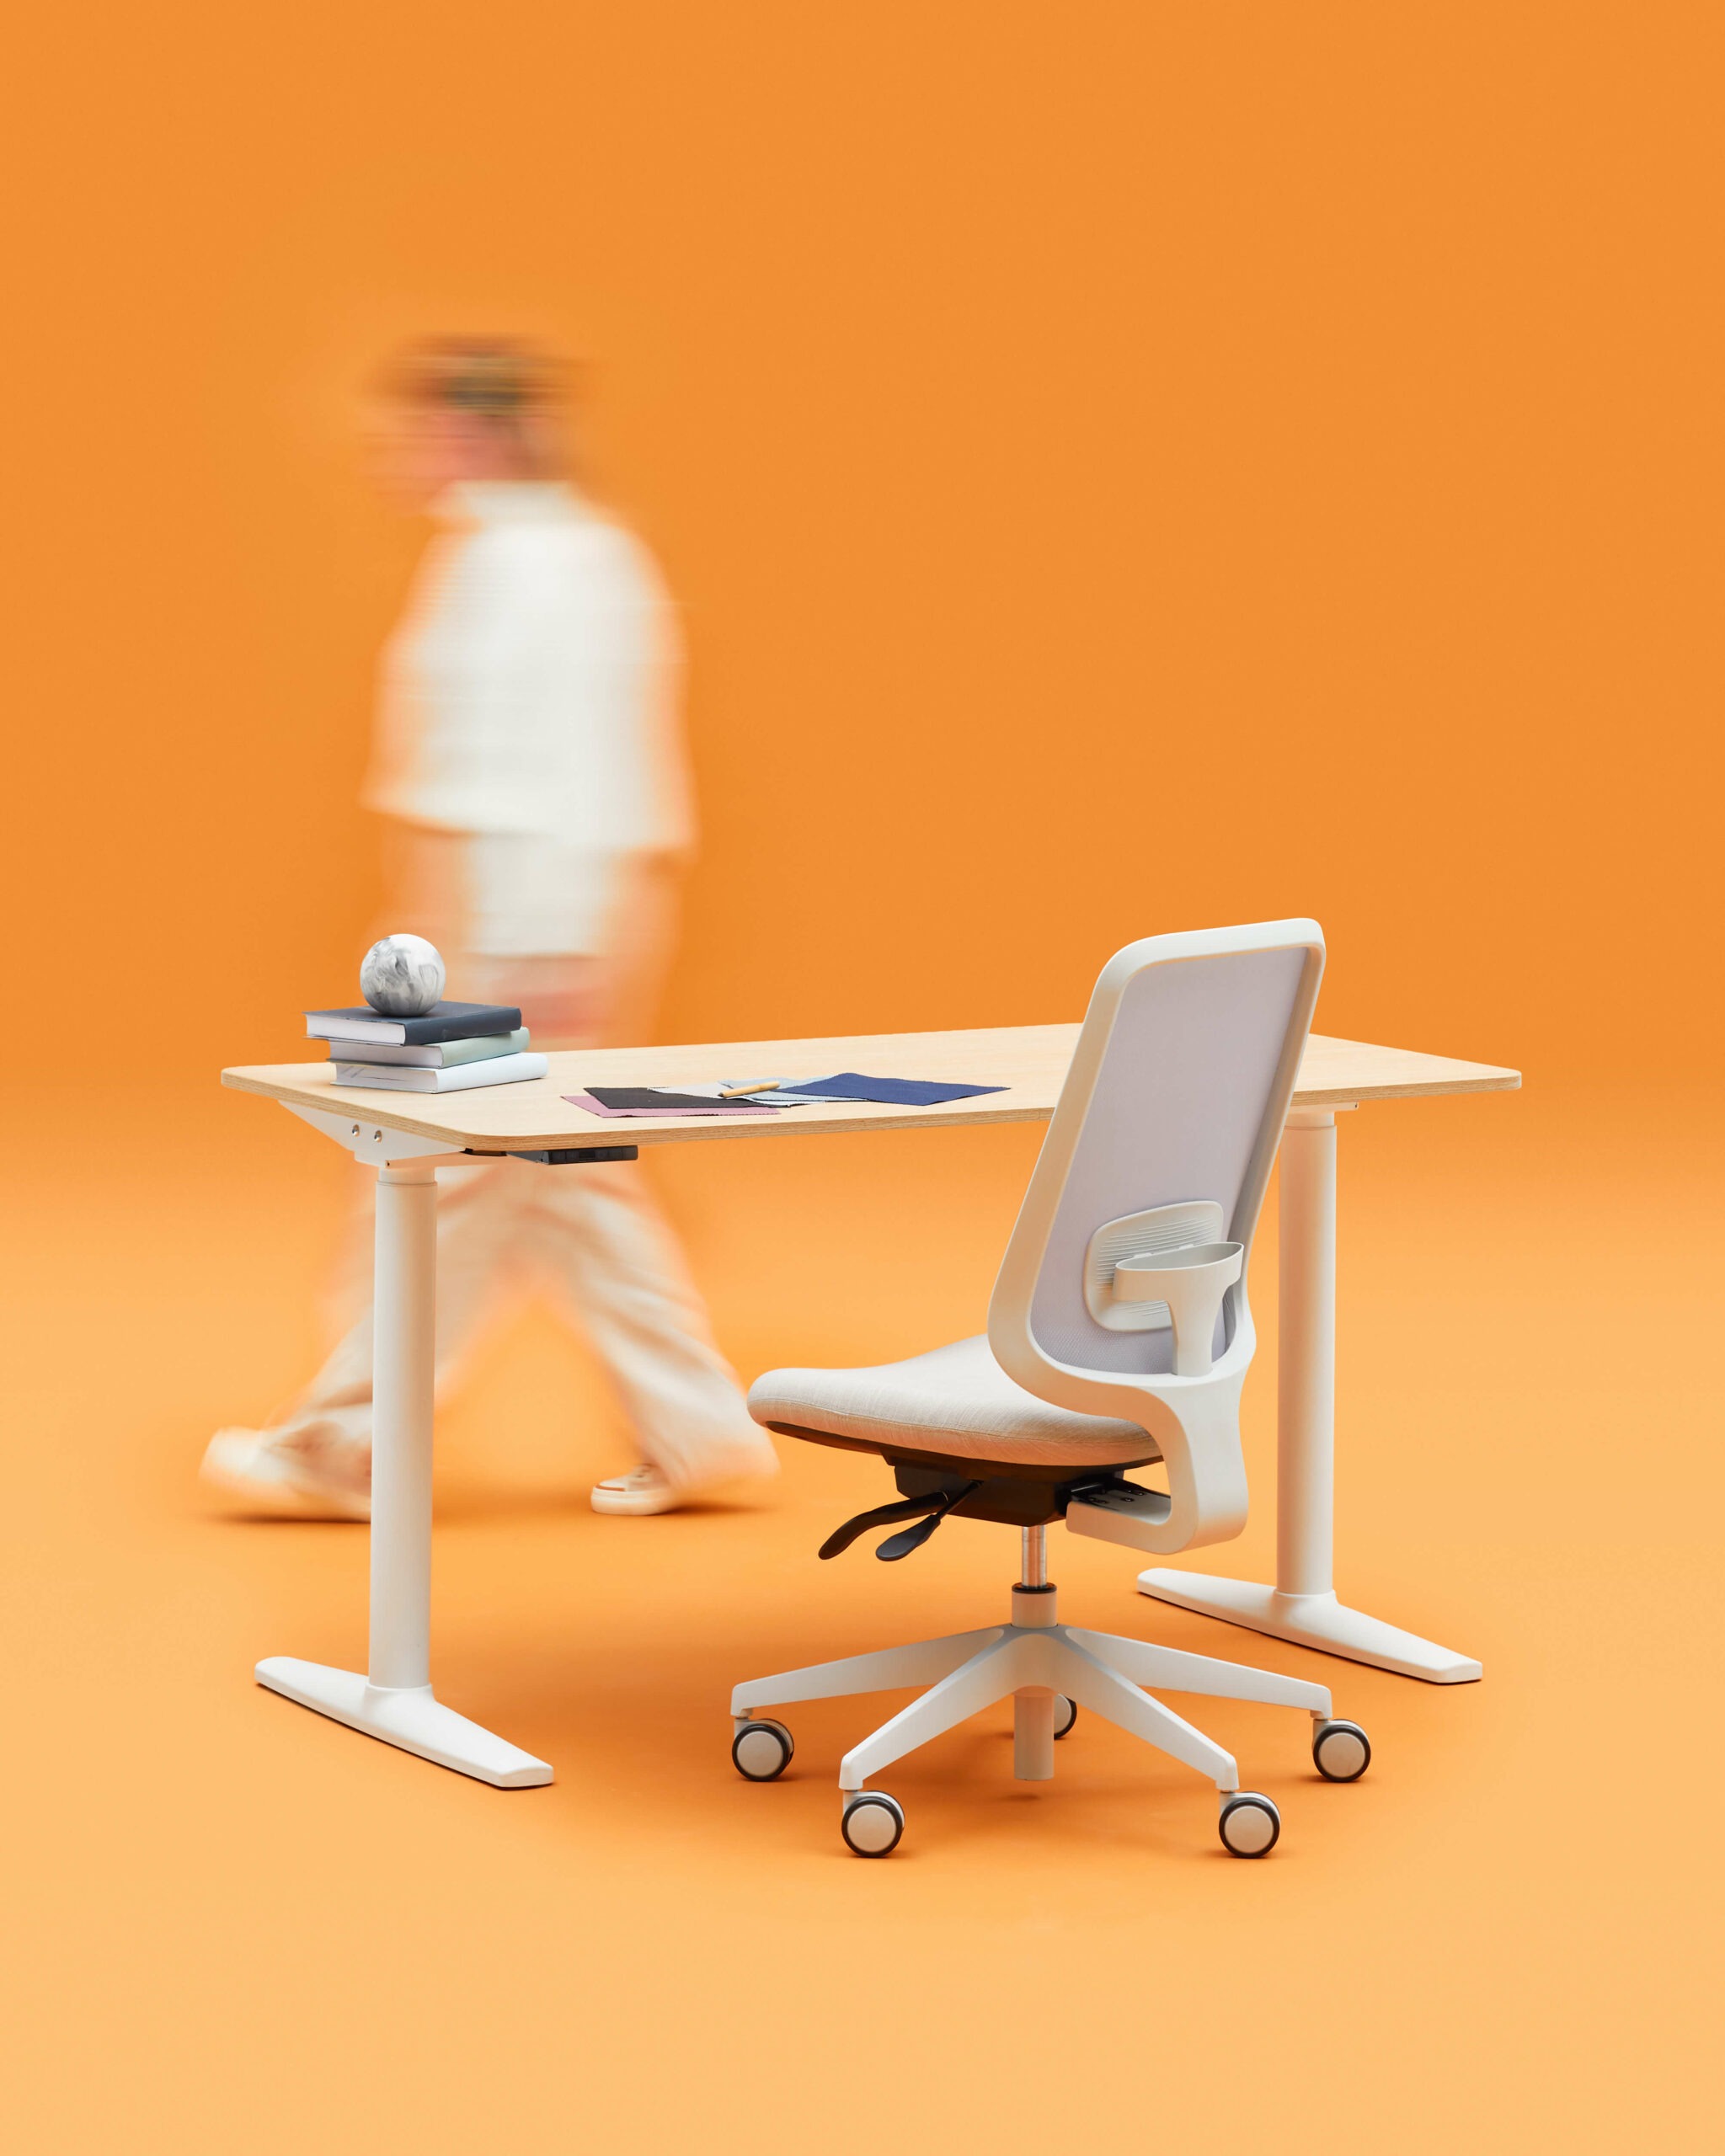 Blurred Person Walking In Front Of A Desk One Adjustable Height Desk And An Armless Task One Office Chair